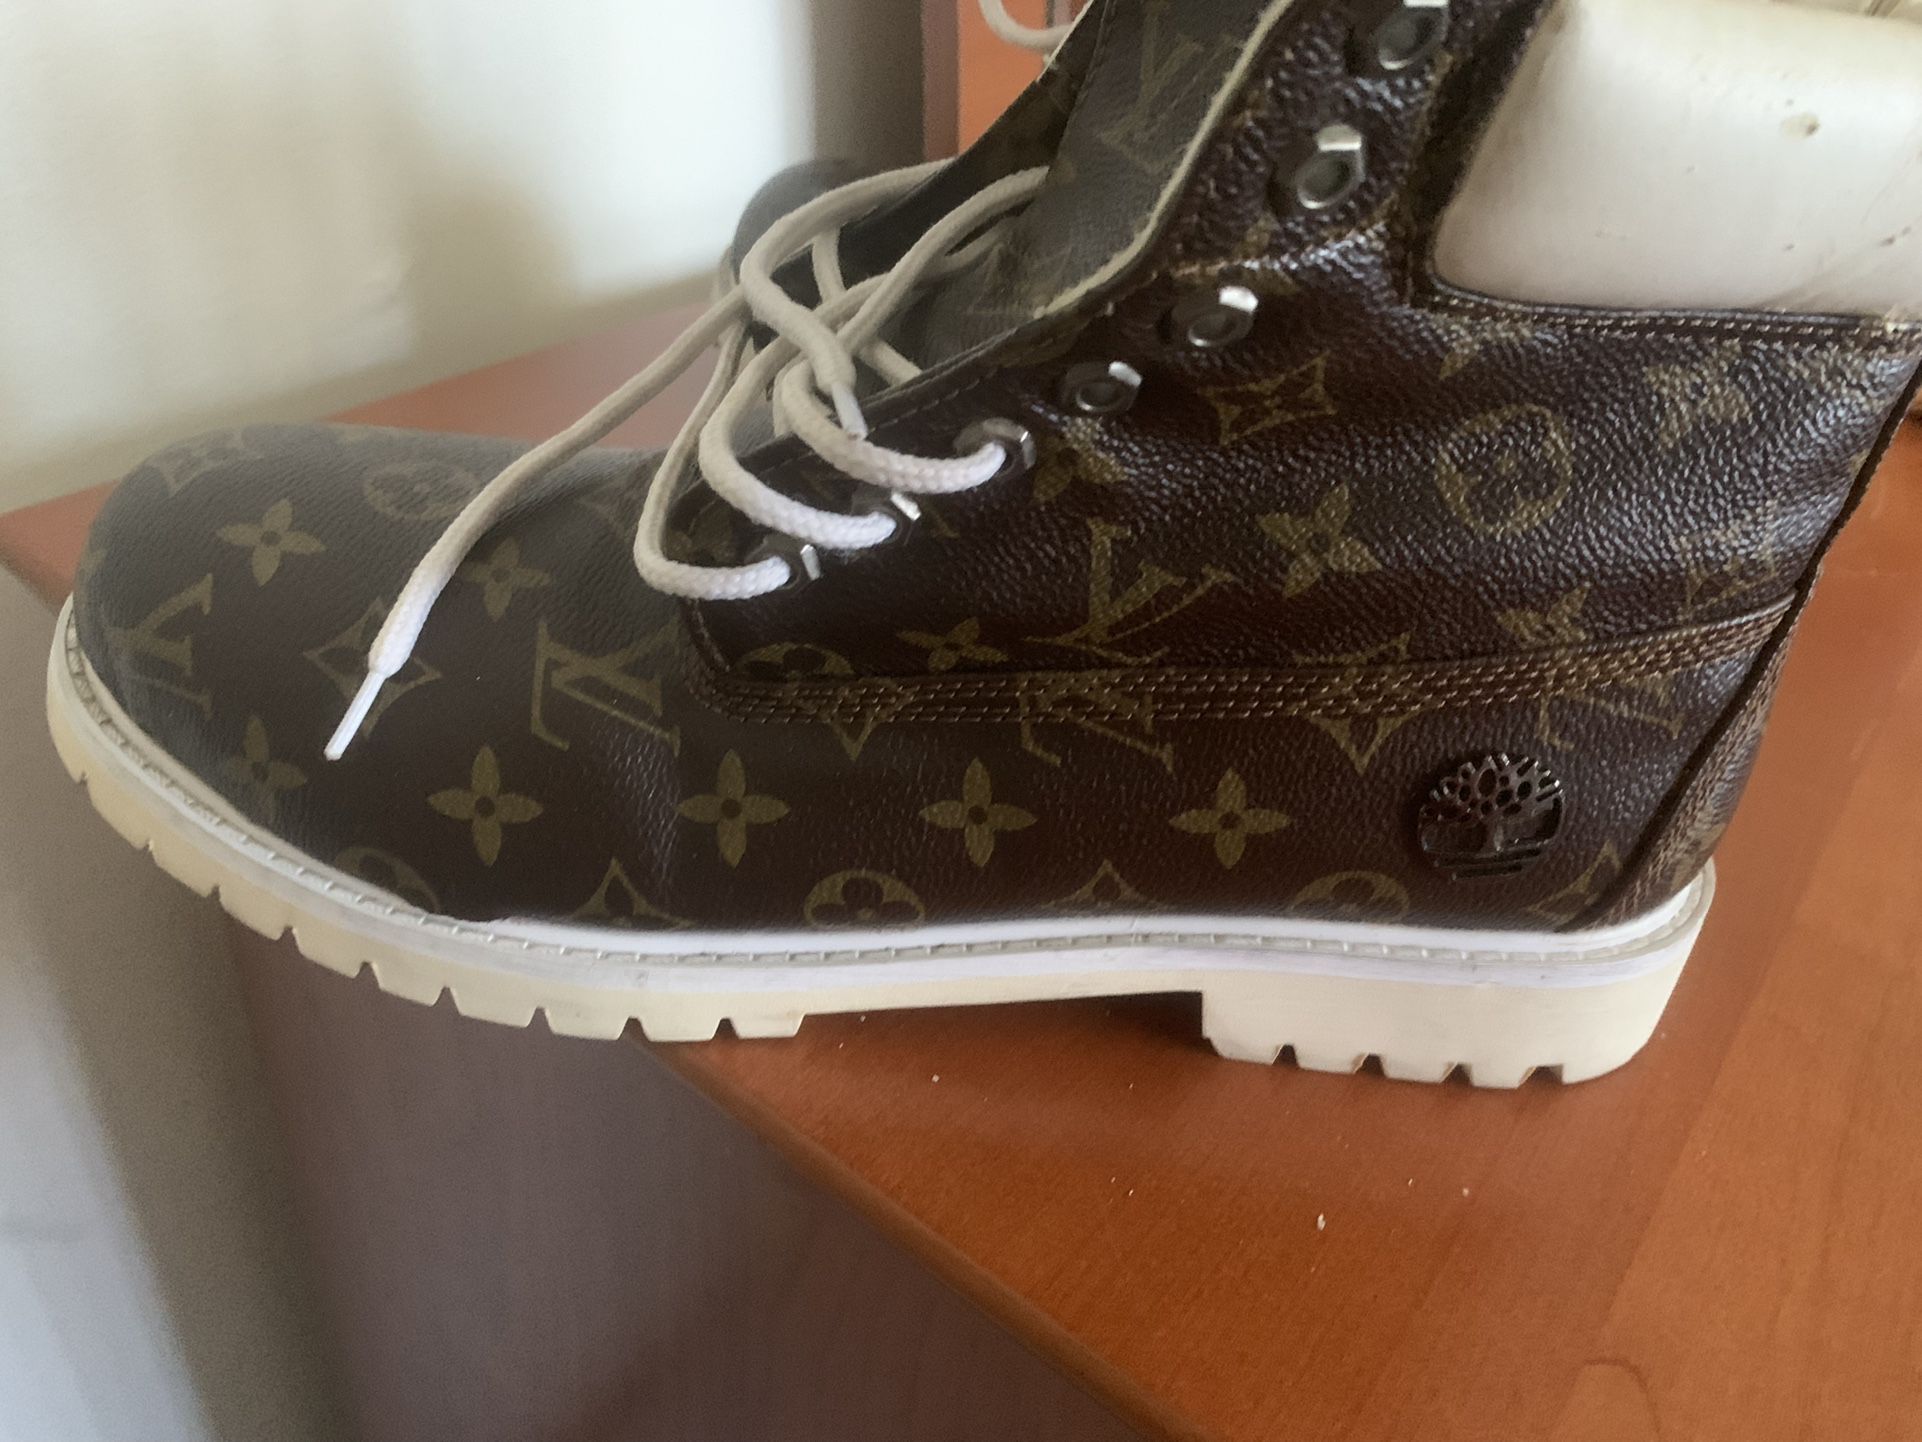 sovende Detektiv idiom Louis Vuitton timberlands (Size 12) for Sale in Blue Island, IL - OfferUp